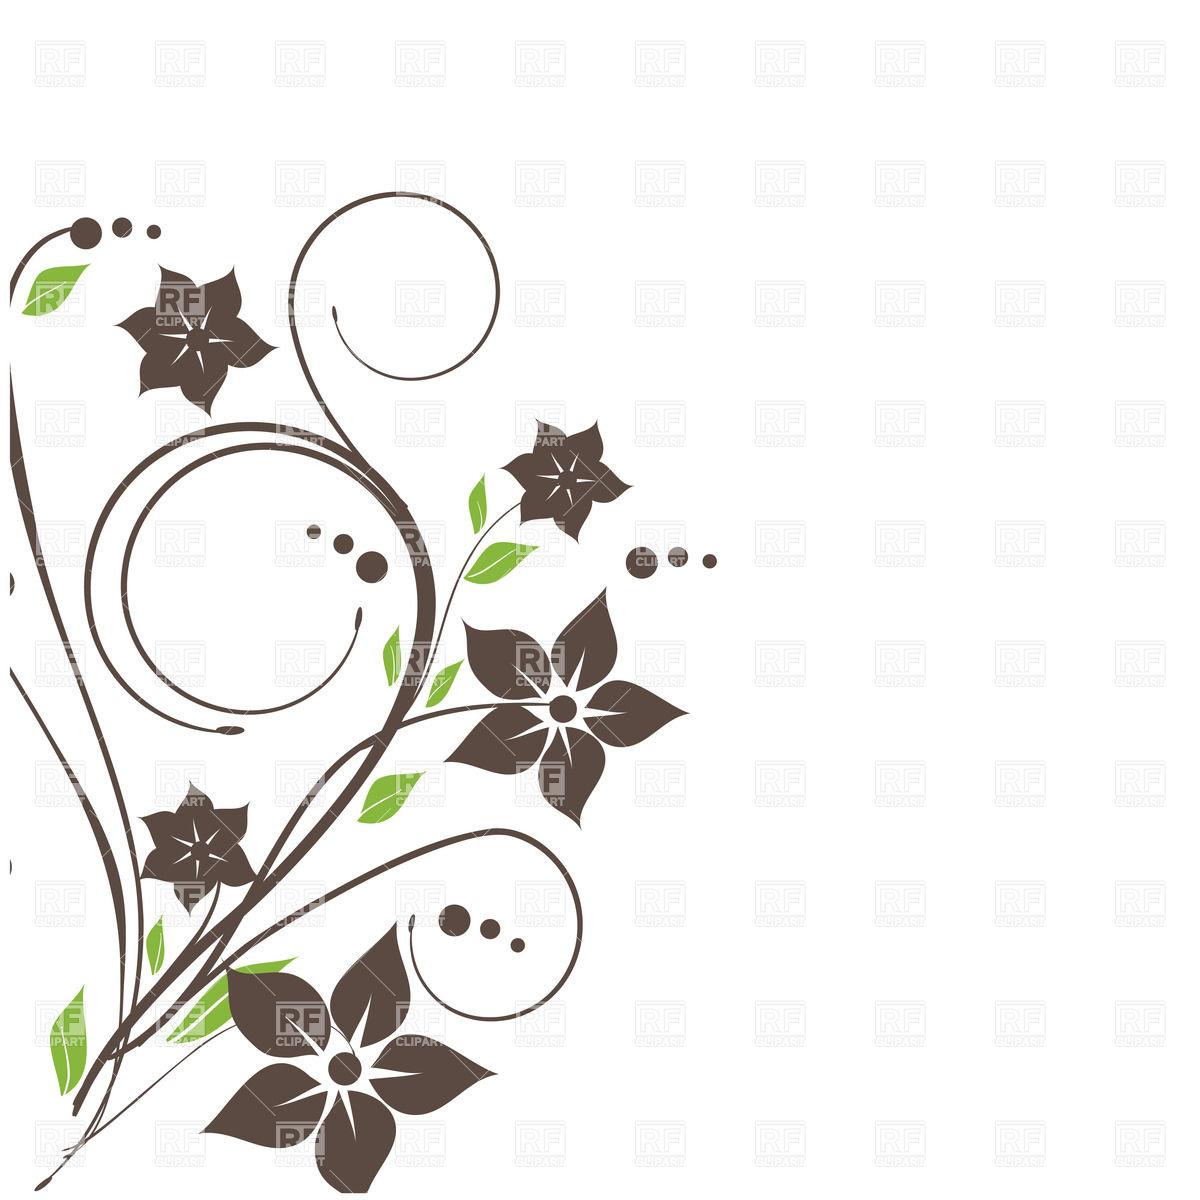 Abstract simple curly plant with leaves and flowers Vector Image.